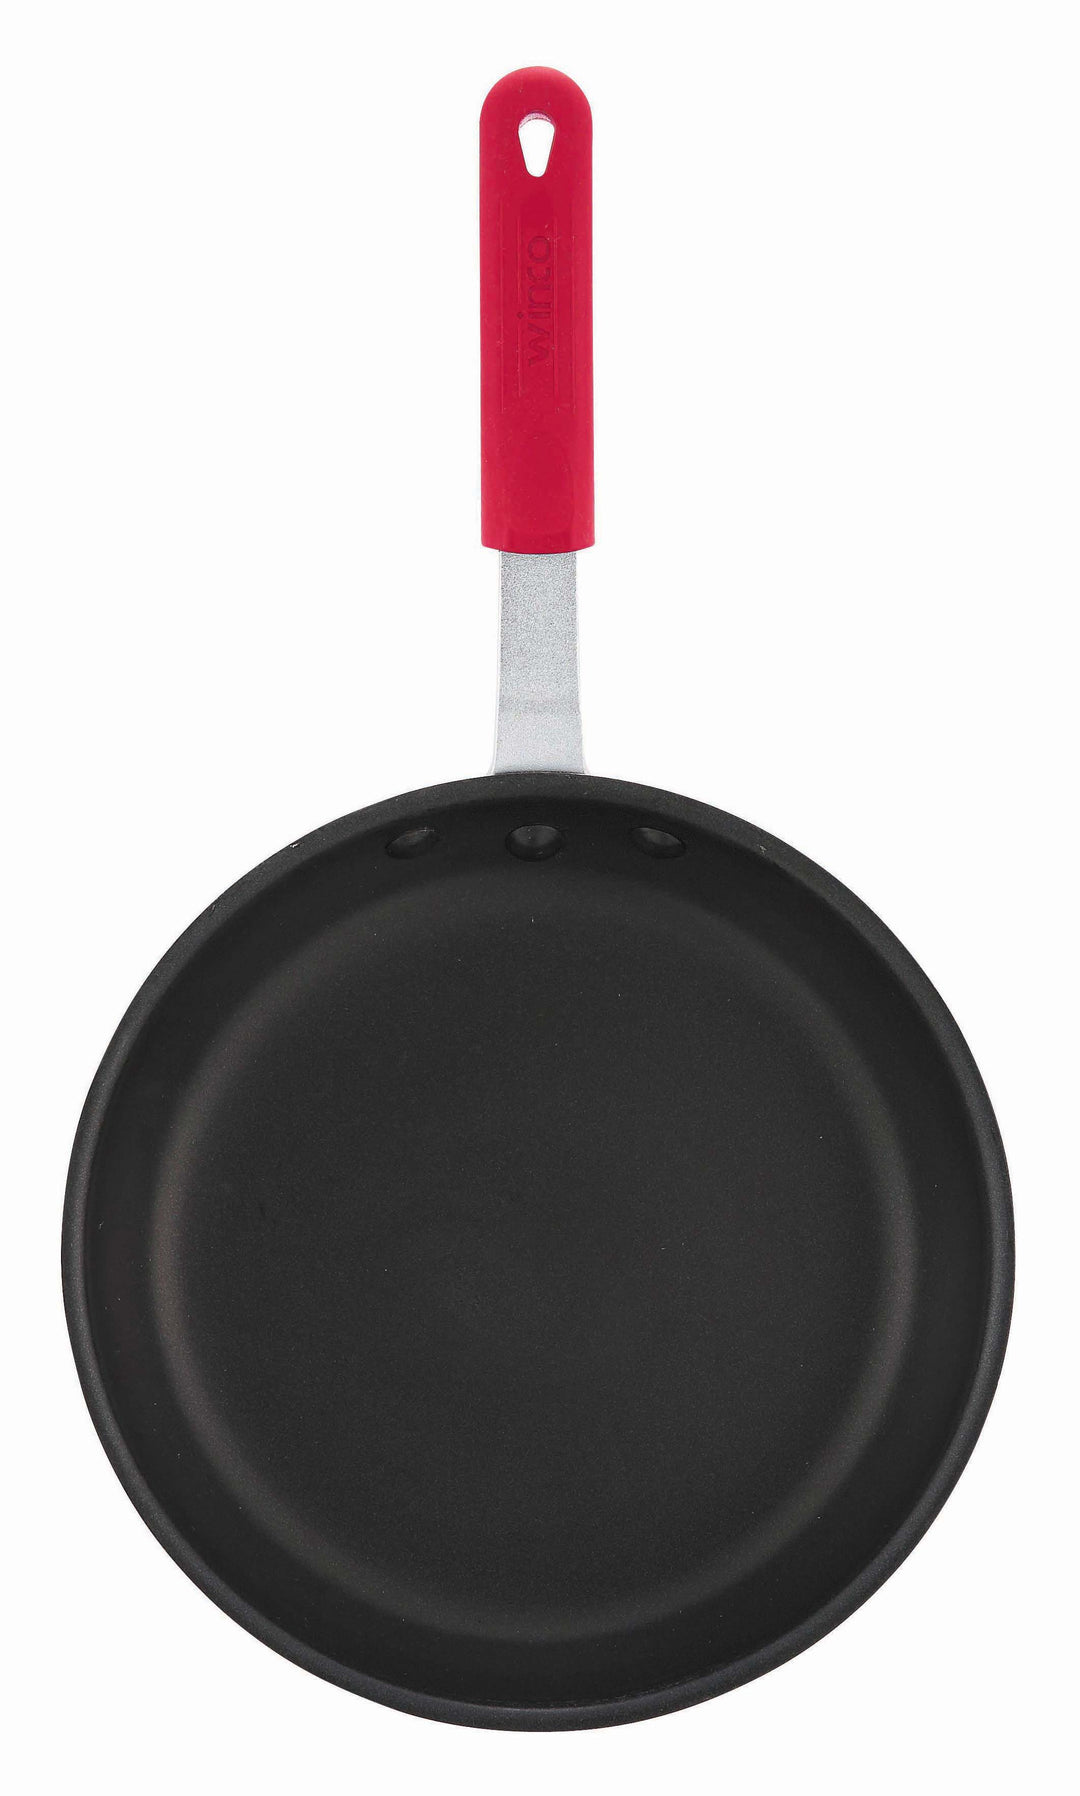 Winco 8 Inch Aluminum Quantum With Sleeve Fry Pan-1 Each